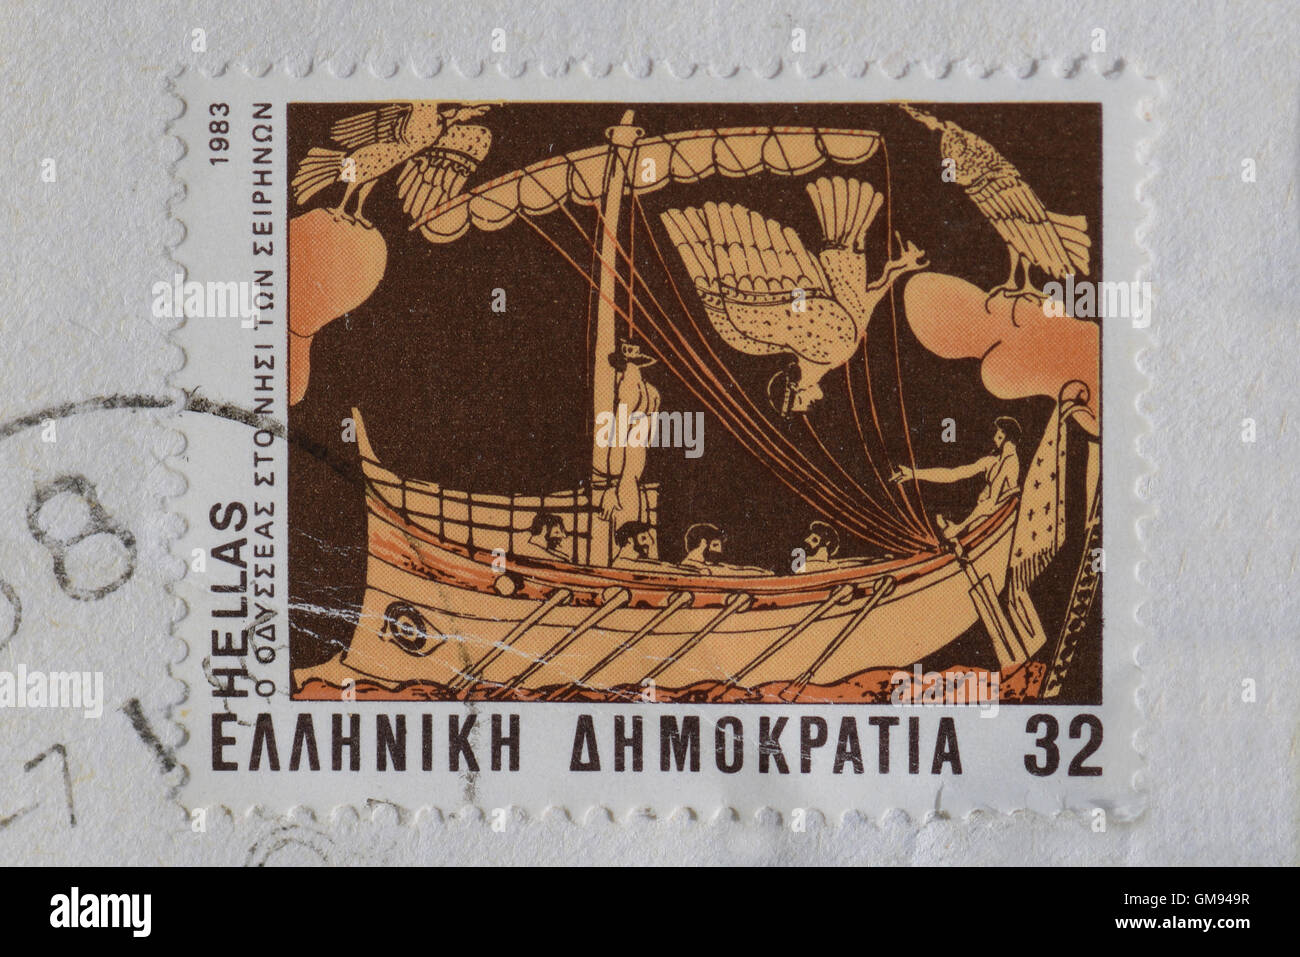 Ulysses tied to ship mast hears the enchanting sirens song mythical creature half woman half bird hybrid. Postage stamp. Stock Photo